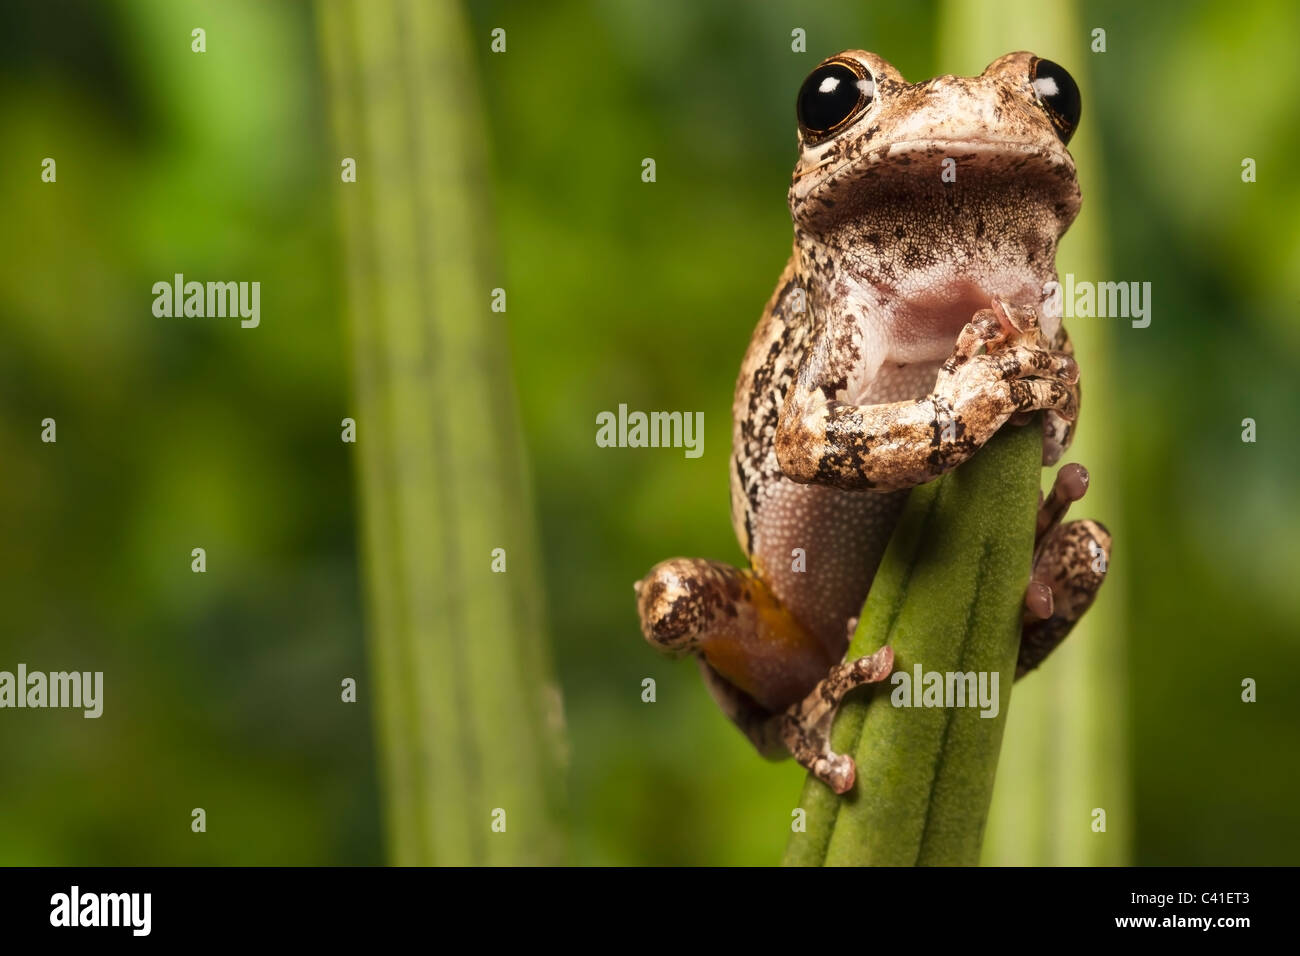 North American Gray Tree Frog [Hyla versicolor] clinging to a leaf, portrait Stock Photo